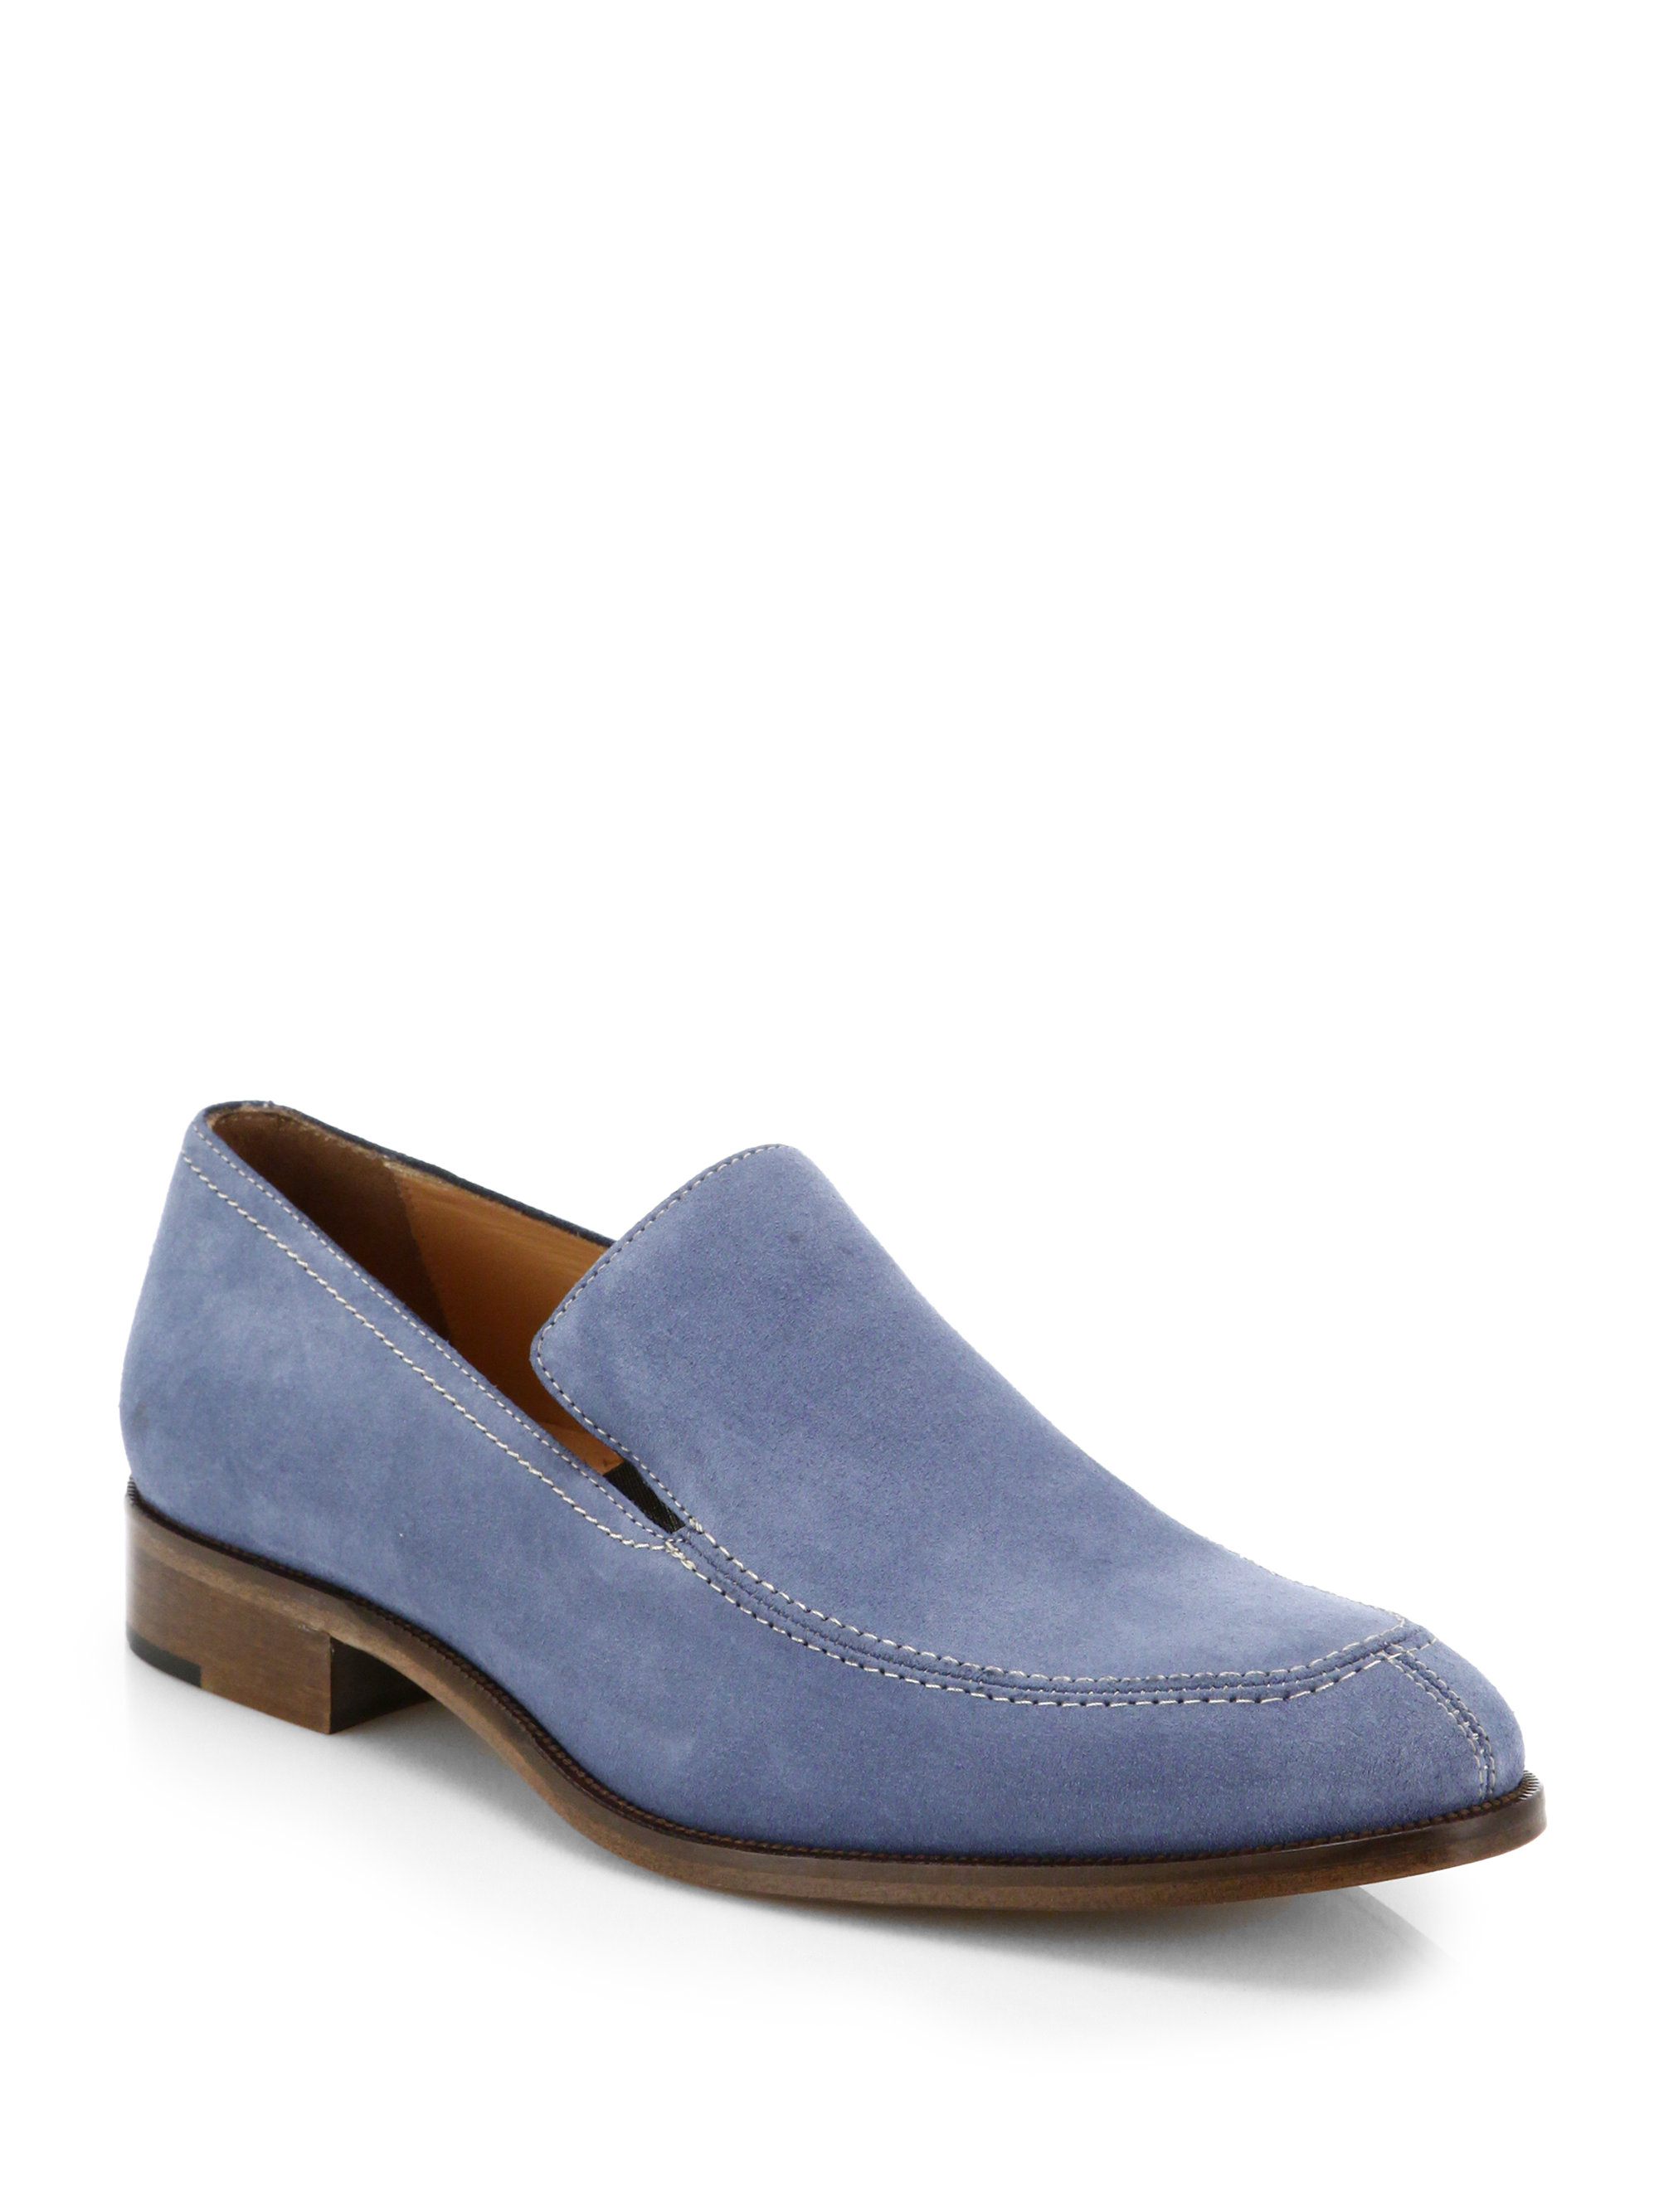 Saks Fifth Avenue Suede Loafers in Blue for Men - Lyst